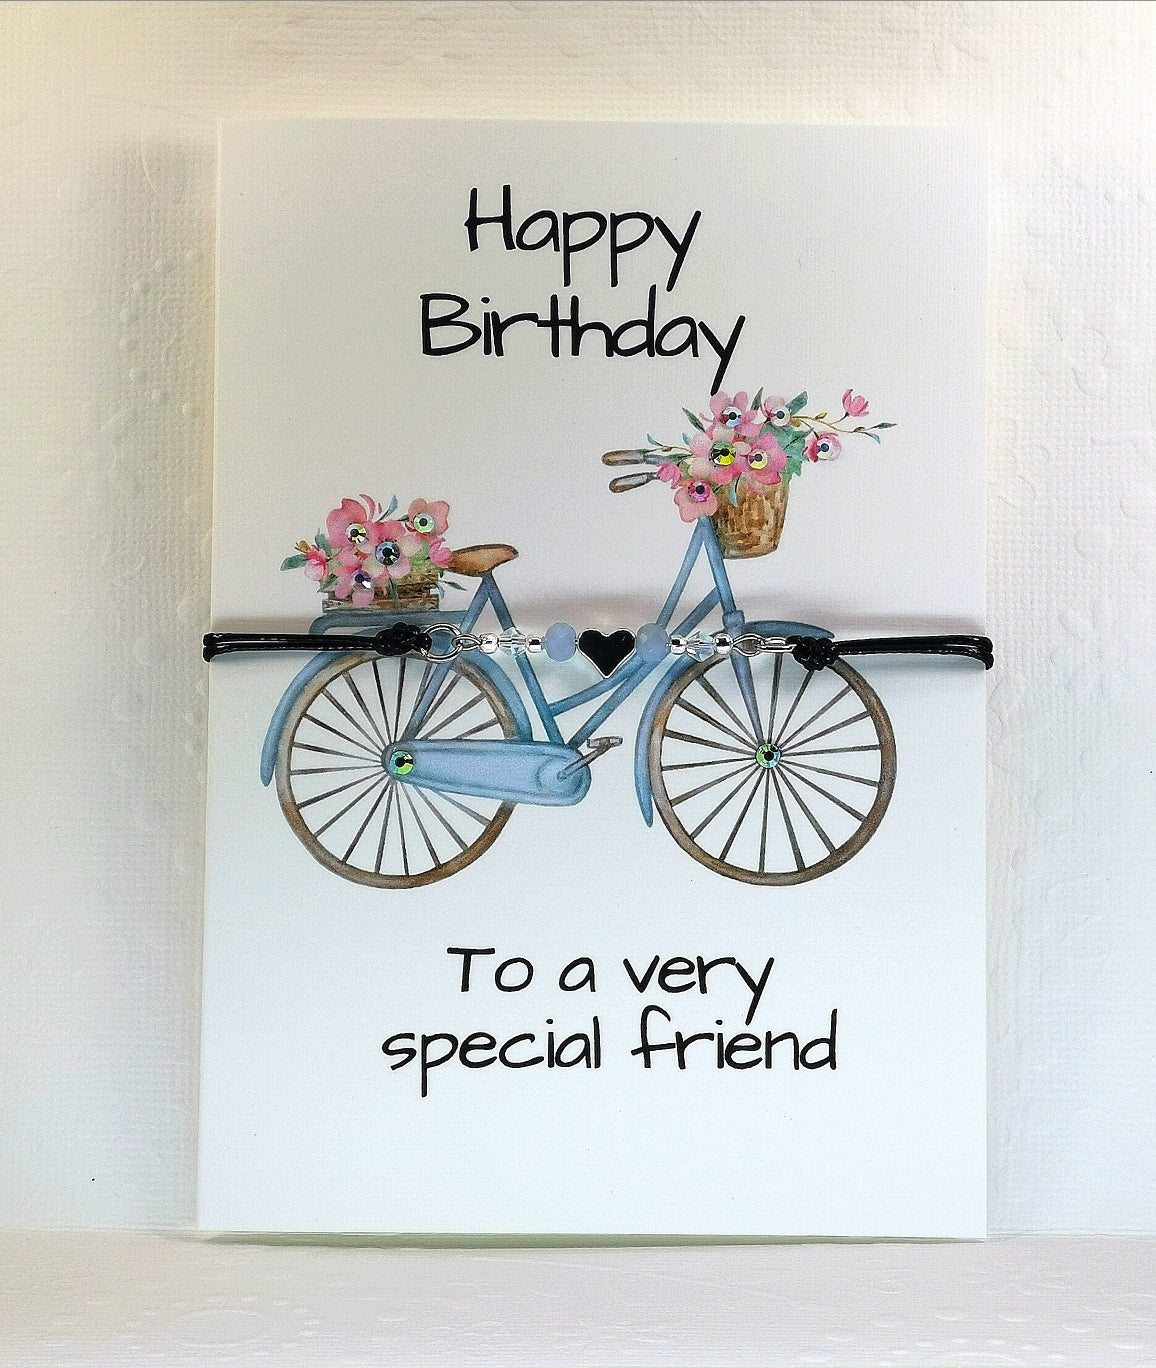 Friendship Birthday Card and Bracelet |   Happy Birthday to a very special friend Card | Cards that mean more